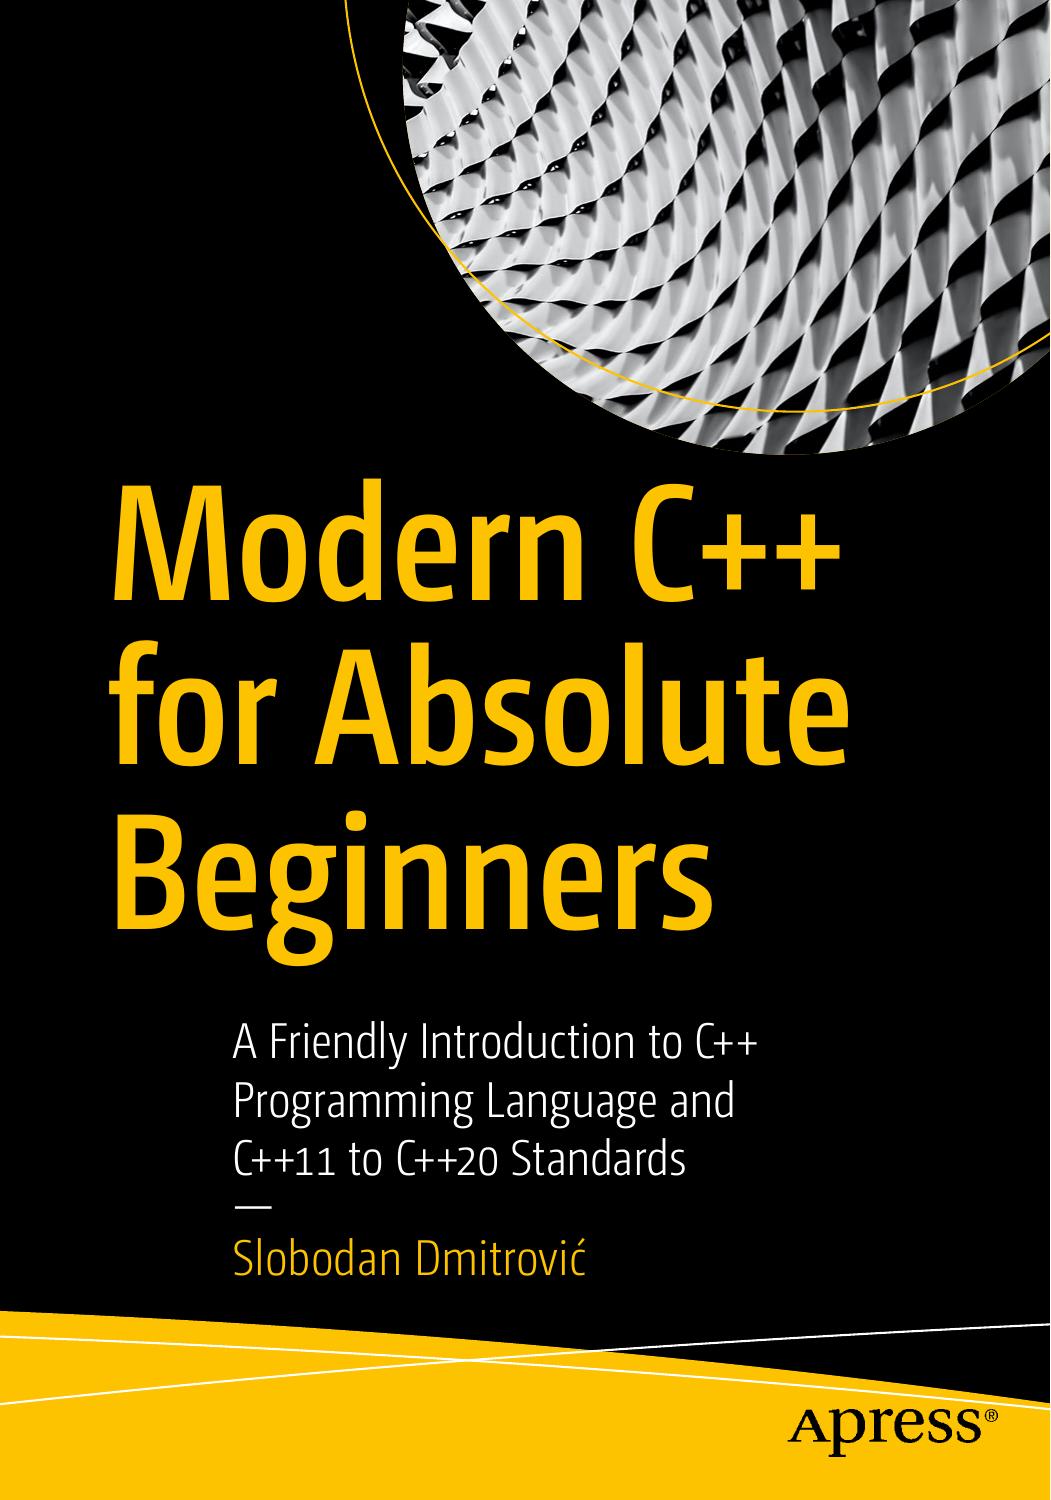 Modern C++ for Absolute Beginners: A Friendly Introduction to C+ Language and C+11 to C+20 Standards